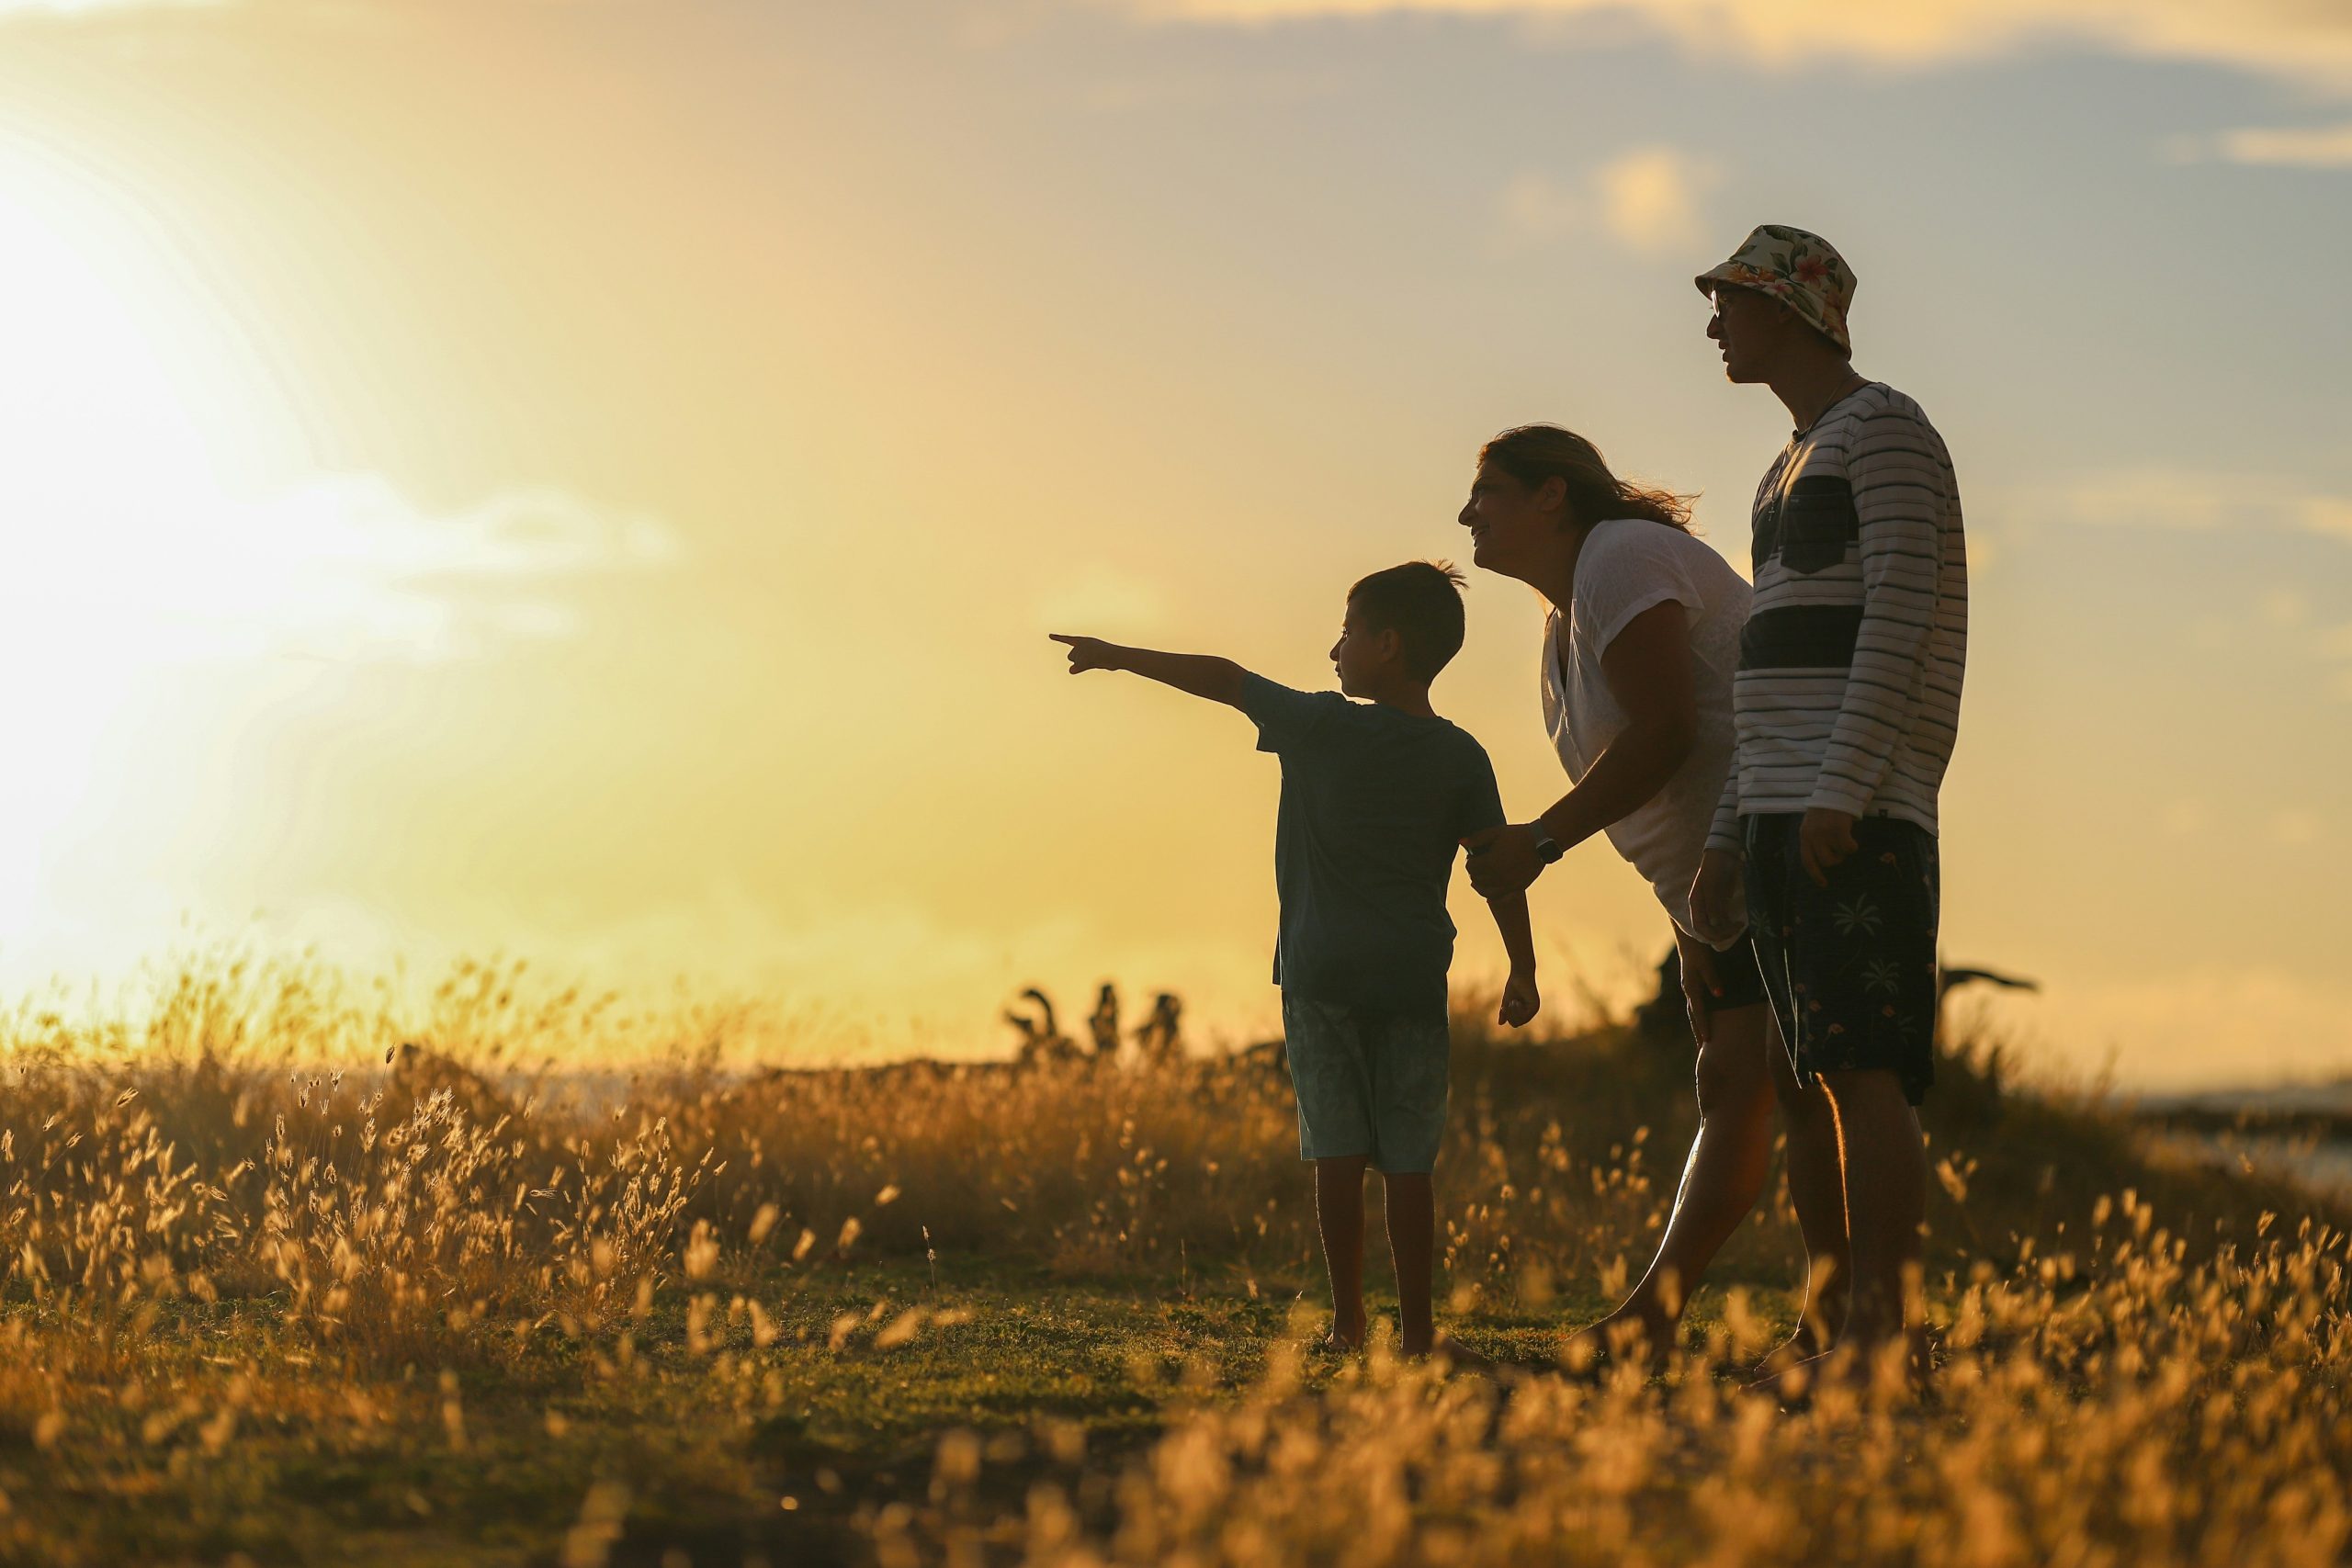 plan an unforgettable family vacation with our expert tips and recommendations. discover the perfect destinations and activities for a memorable experience.